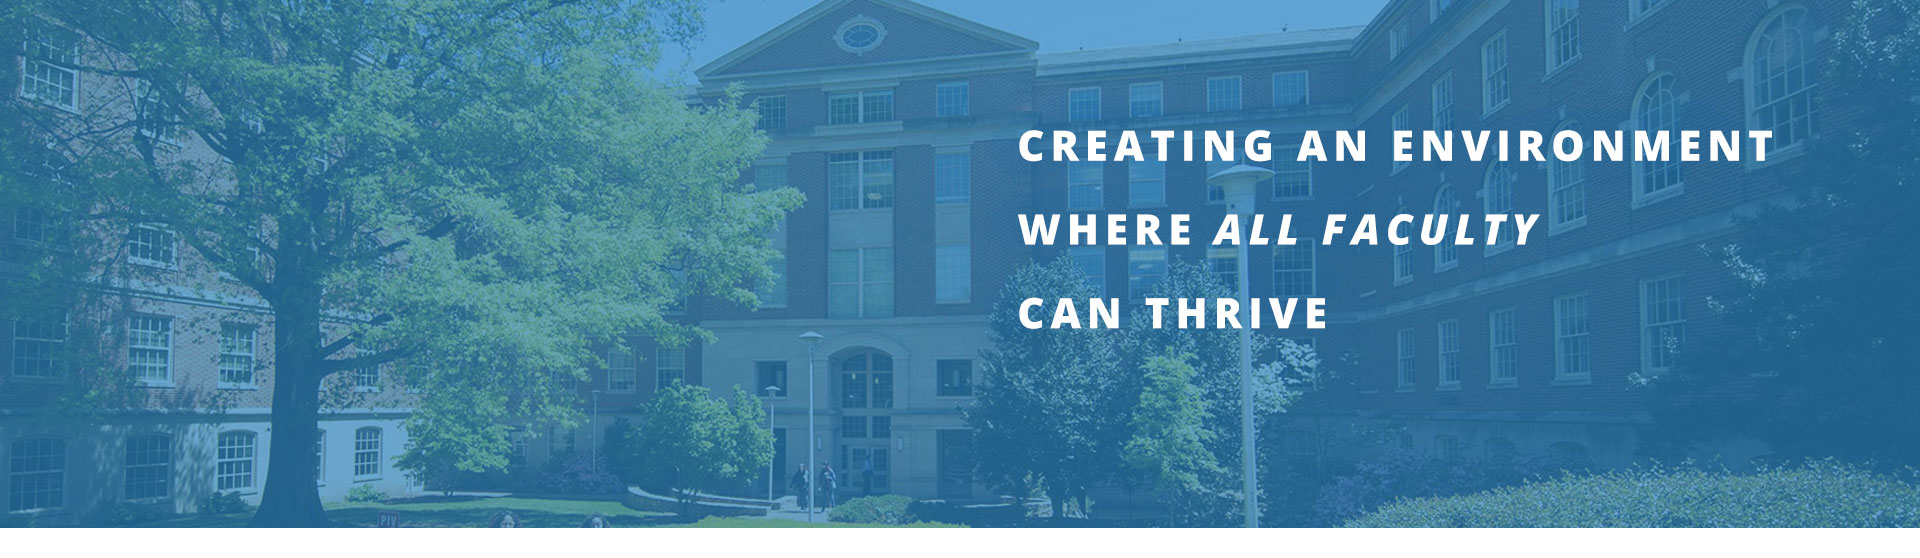 Creating an environment where all faculty can thrive